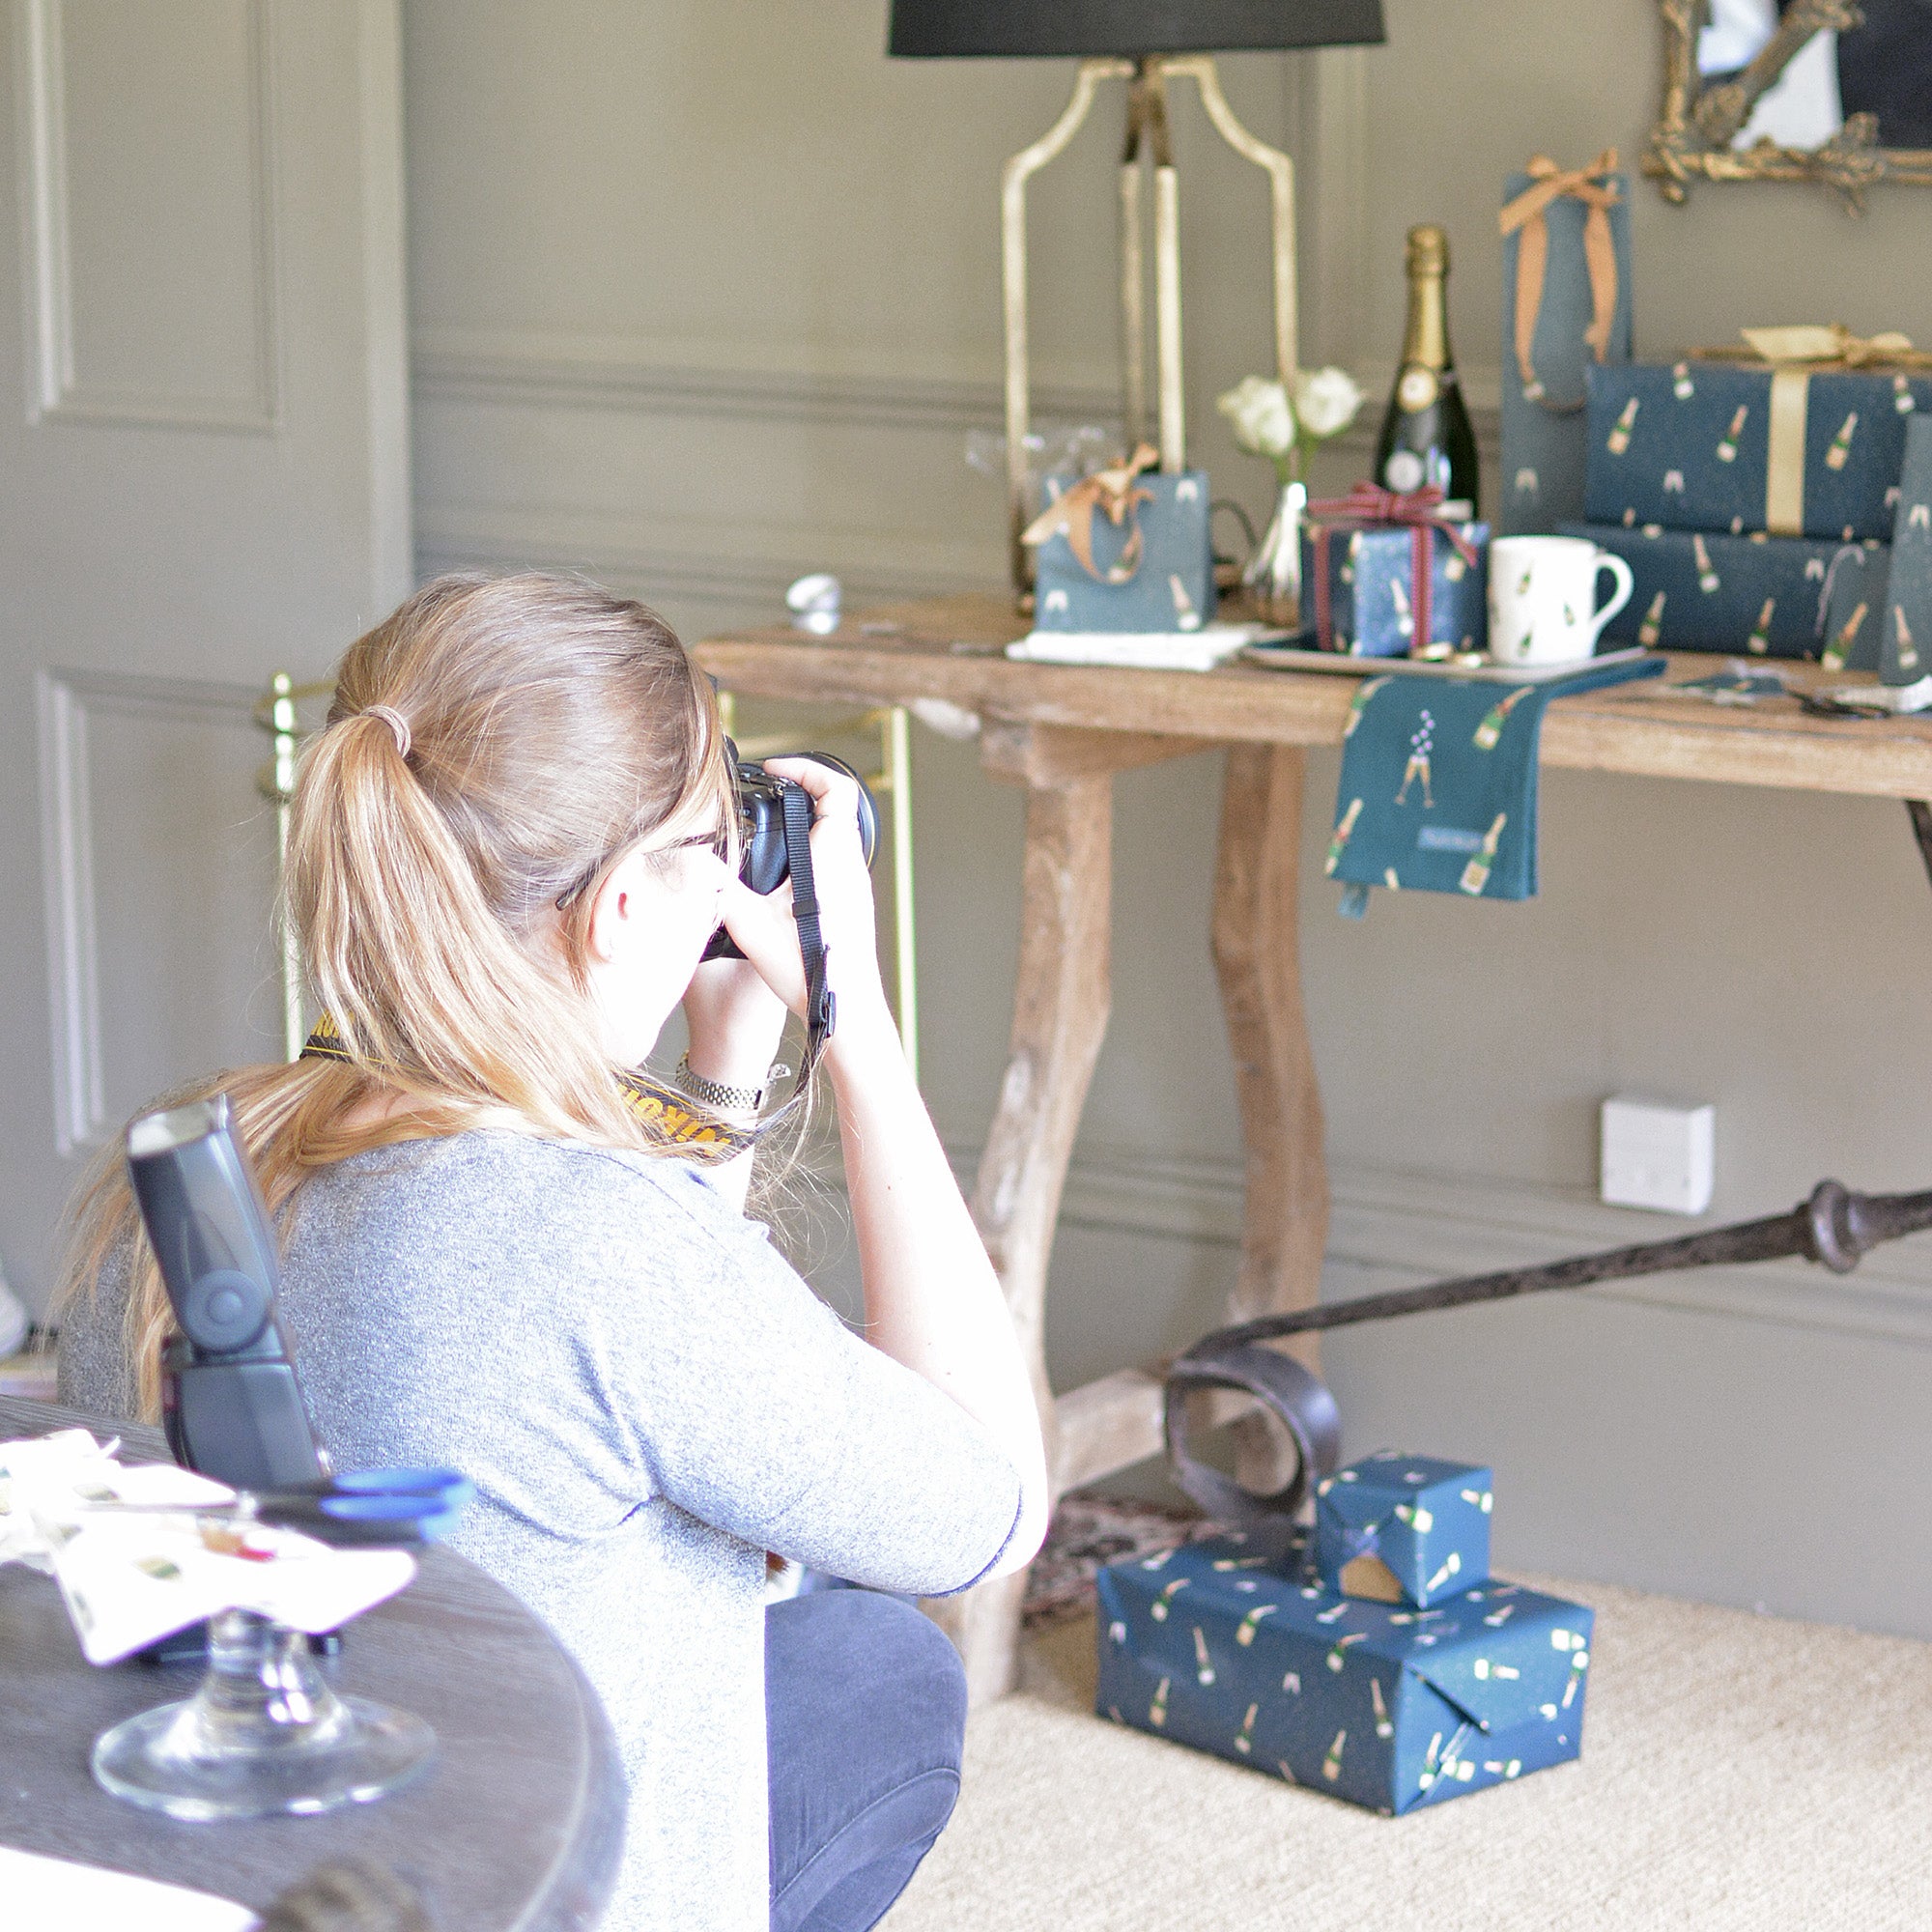 Behind The Scenes Of Our Bubbles & Fizz Photoshoot